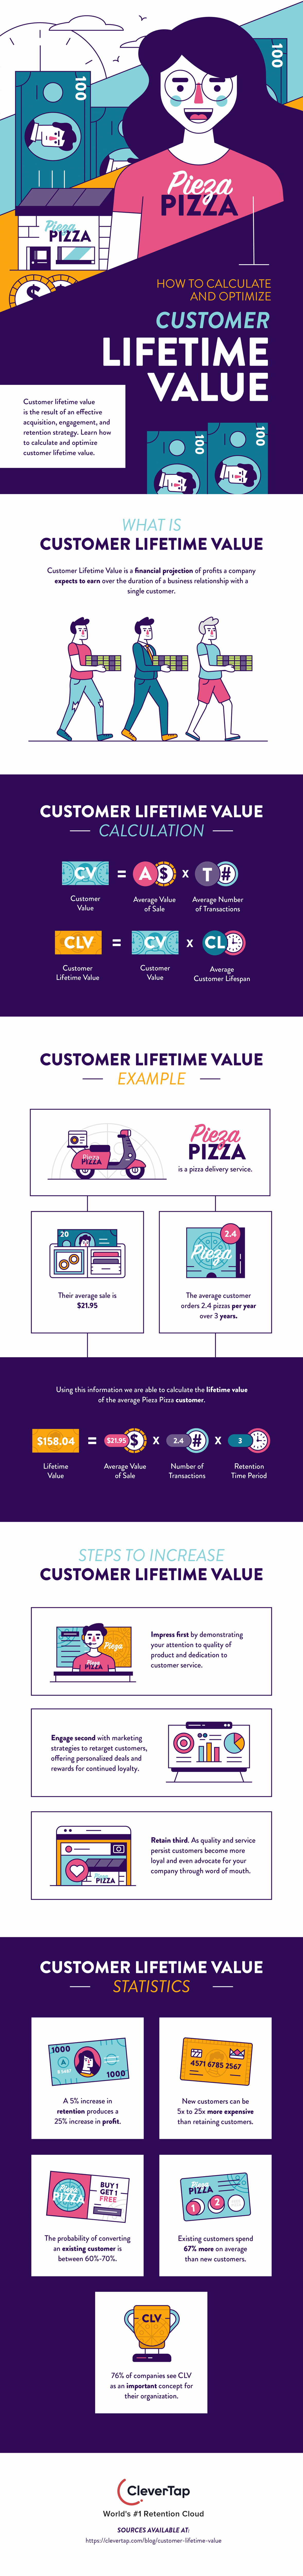 Customer Lifetime Value infographic showing formula for calculating CLV and a case study of an imaginary pizza shop 